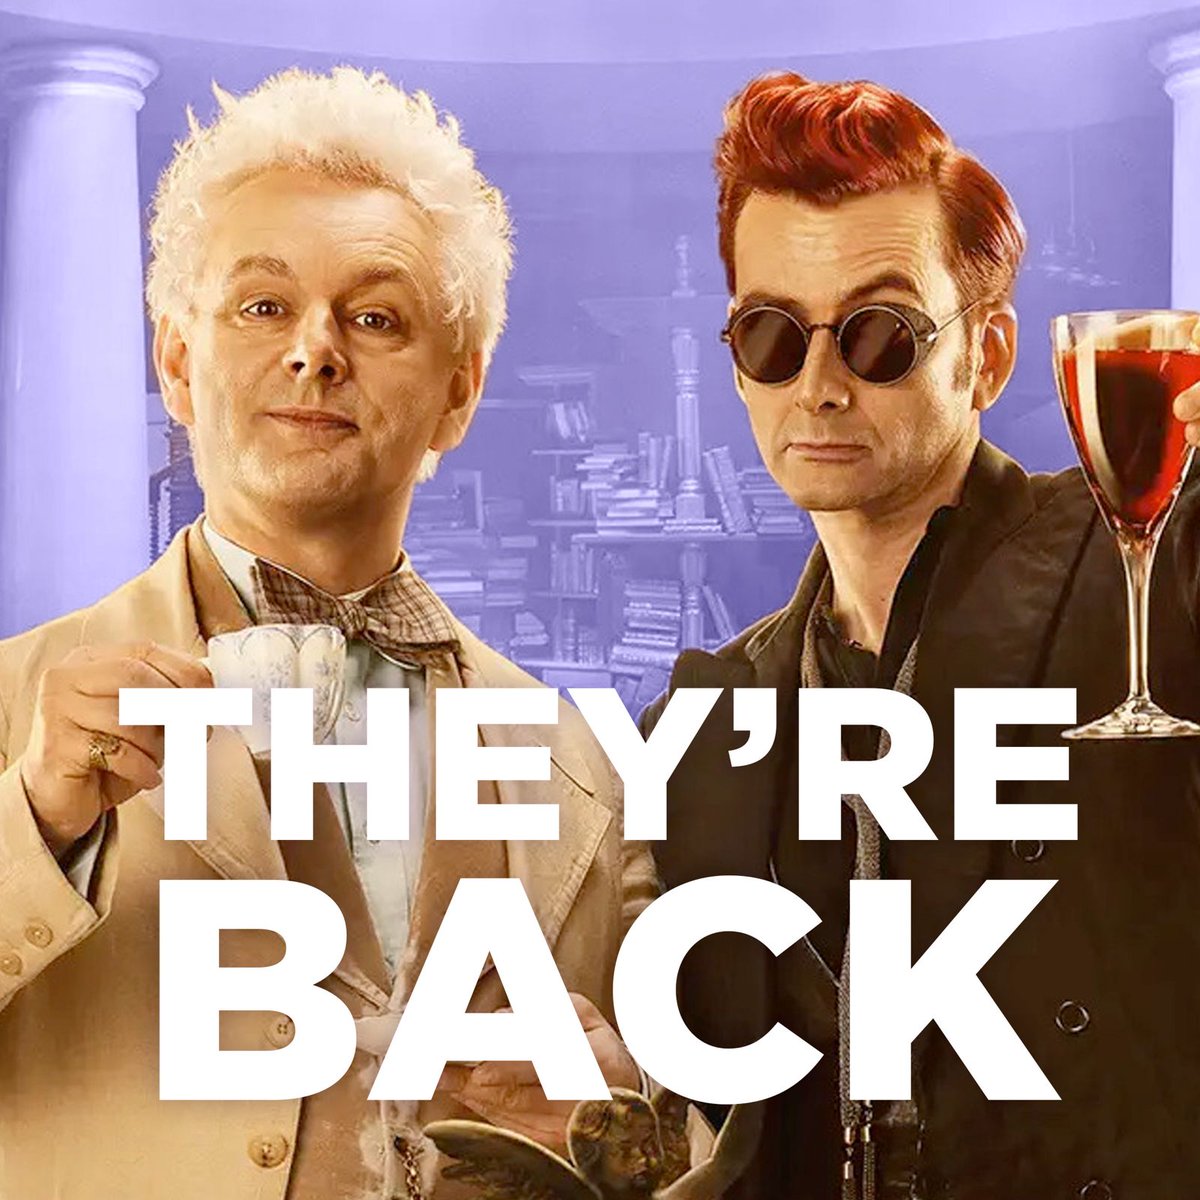 GOOD OMENS. SEASON 3. CONFIRMED! You’ve been asking, and we are happy to say: Aziraphale and Crowley return for the ineffable third and final season of Good Omens! CAN WE HEAR A WAHOO?